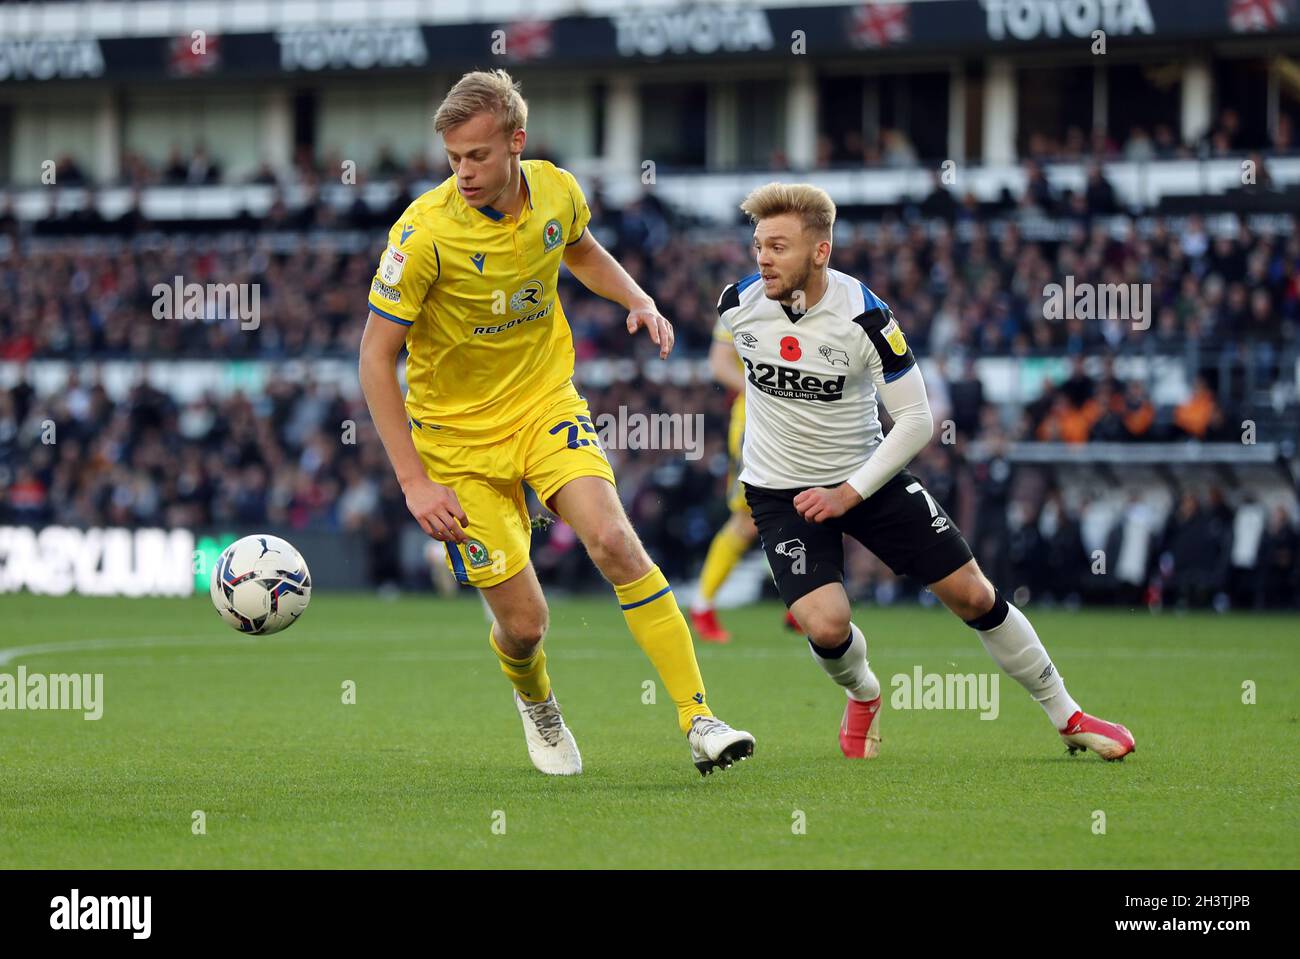 Blackburn Rovers' Jan Paul van Hecke (left) and Derby County's Kamil Jozwiak battle for the ball during the Sky Bet Championship match at Pride Park, Derby. Picture date: Saturday October 30, 2021. Stock Photo